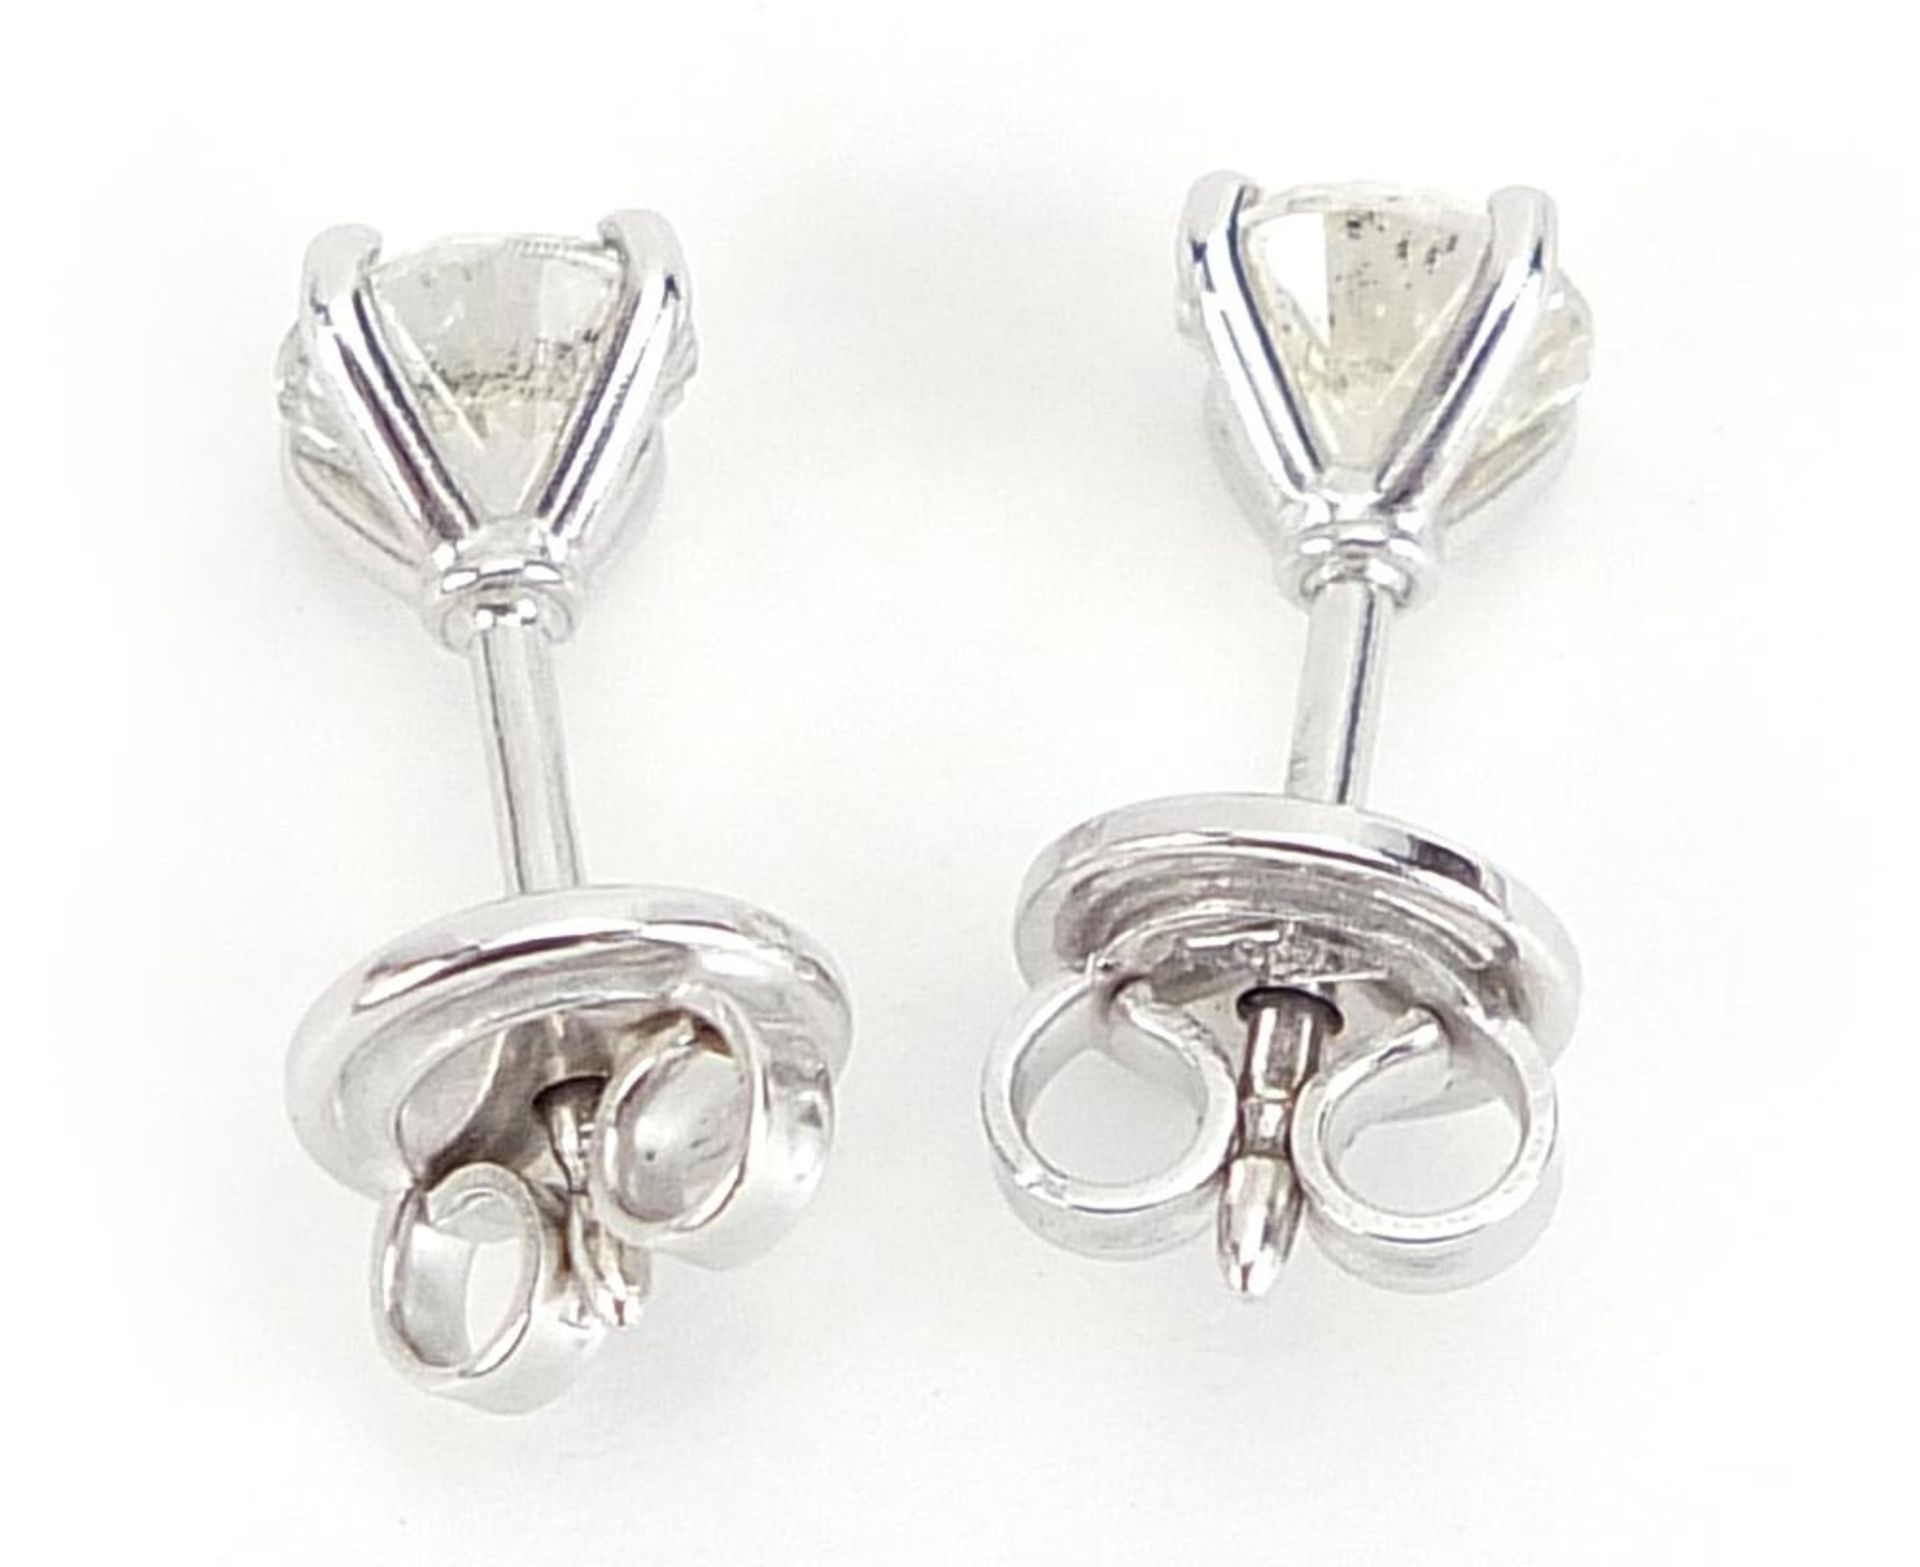 Pair of 18ct white gold diamond solitaire stud earrings, total diamond weight approximately 1.04 - Image 2 of 5